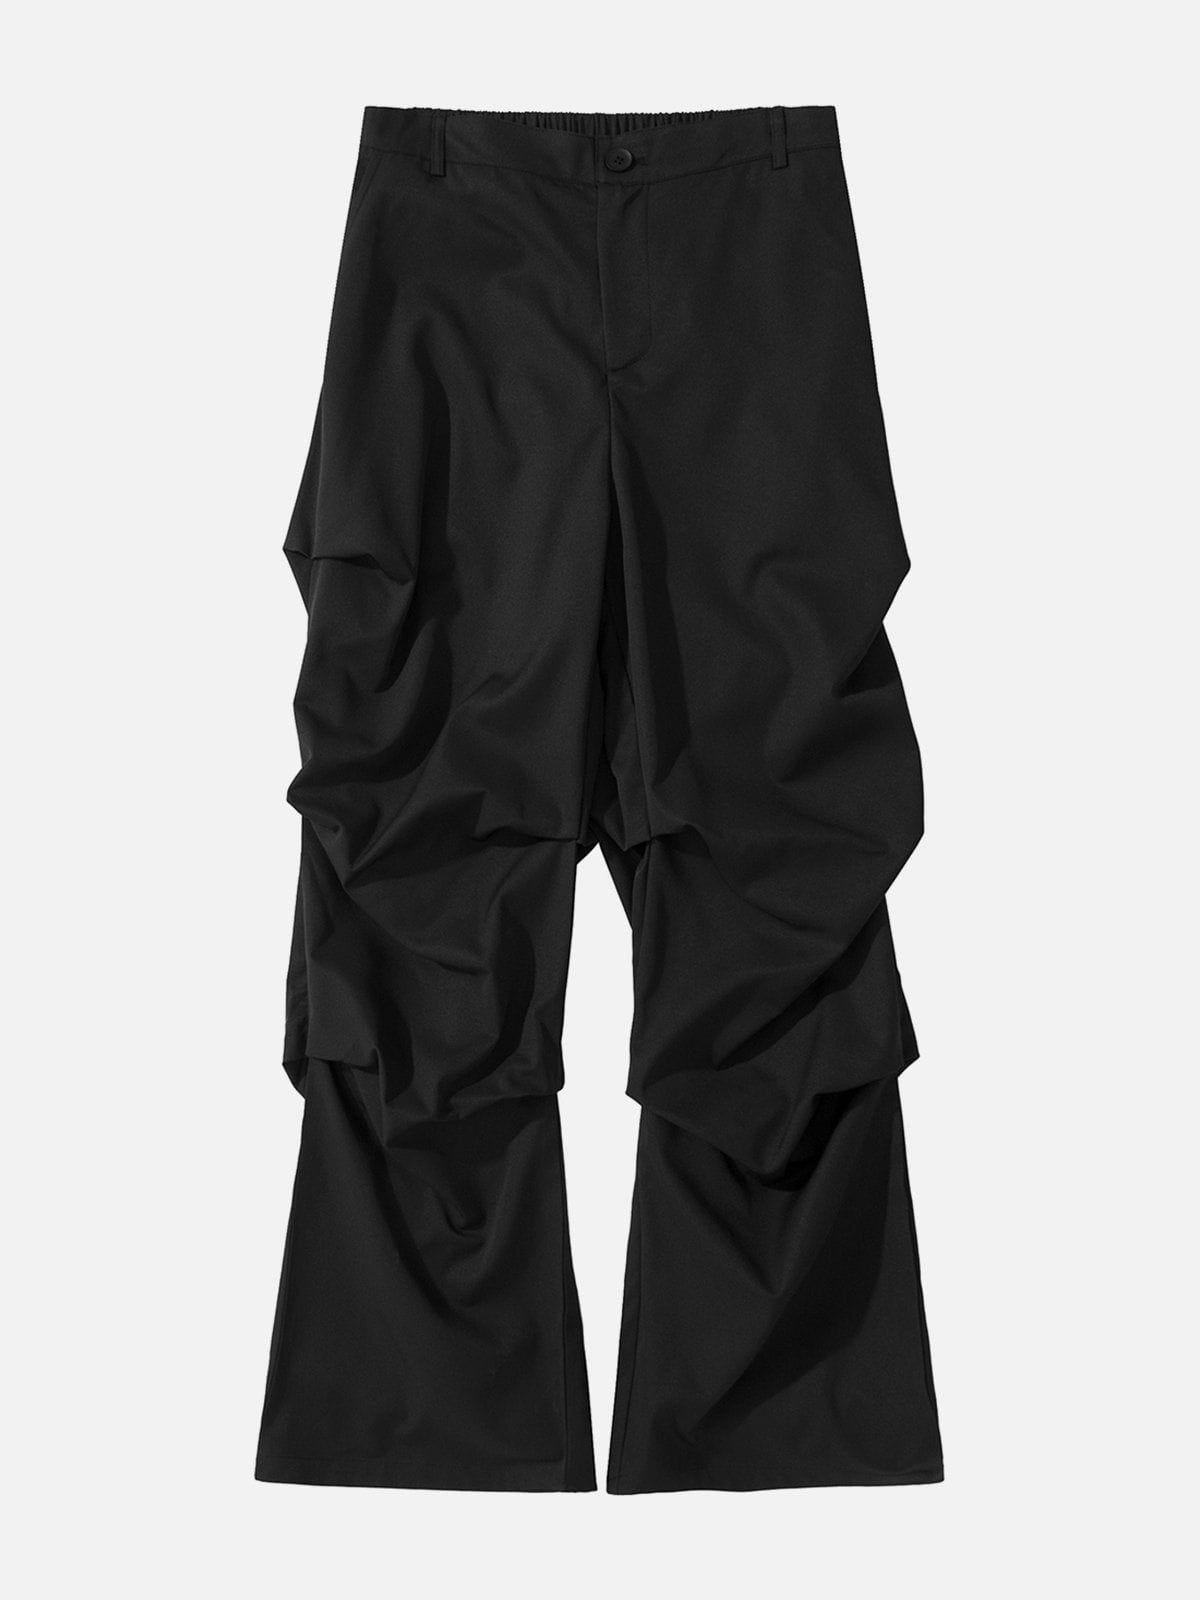 Sneakerland® - Solid Pleated Technical Cargo Pants